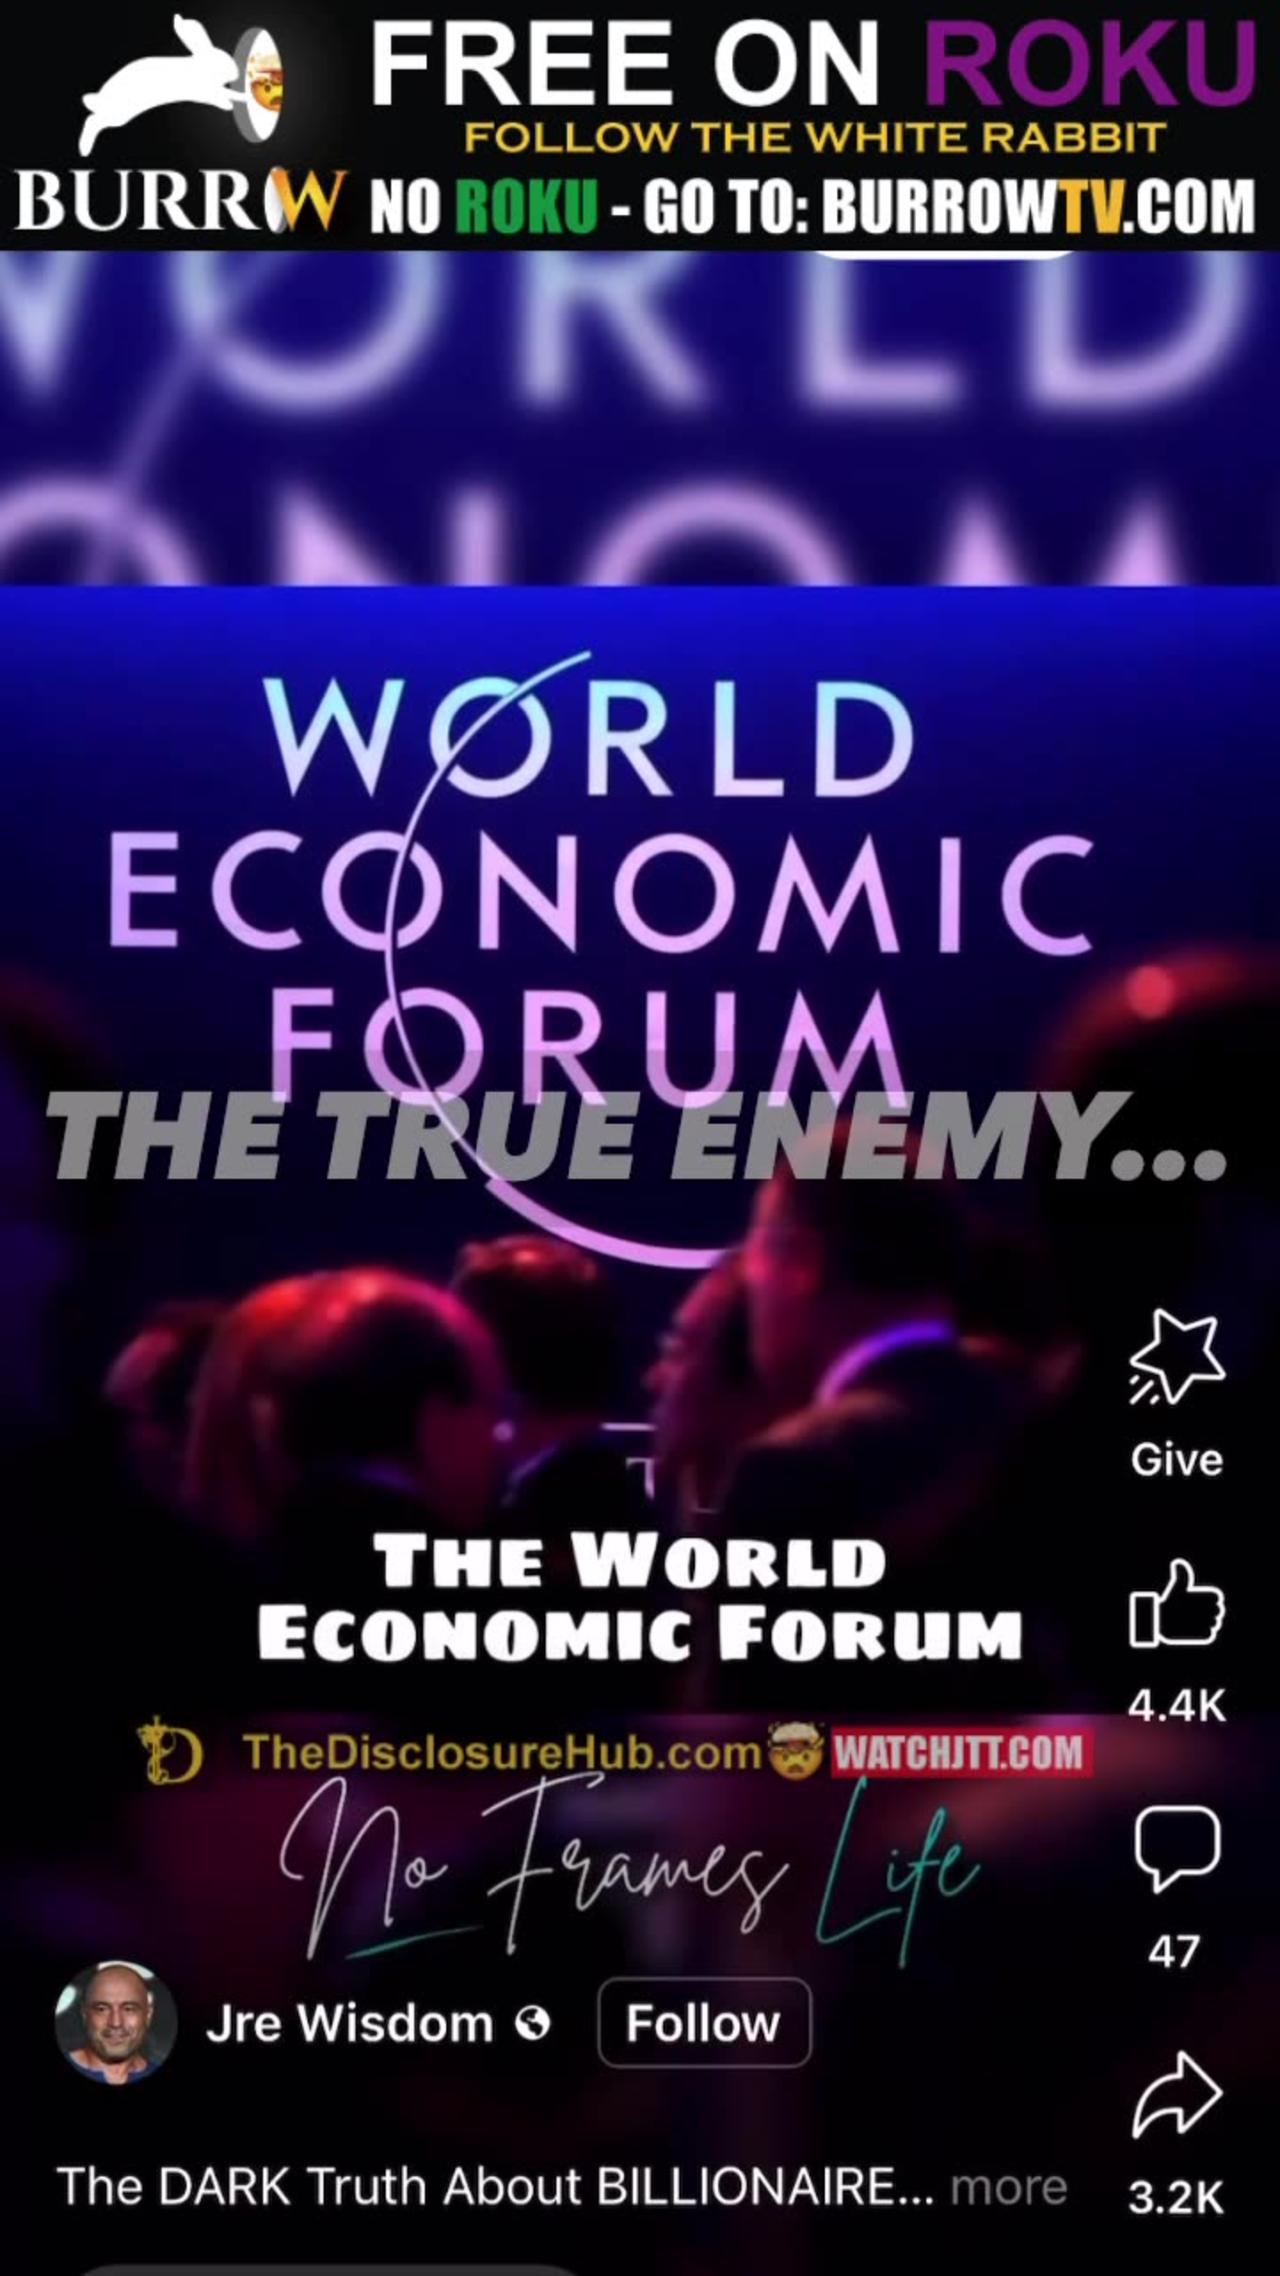 The true enemy is always the elites trying to kill us & the world economic forum, UN & more